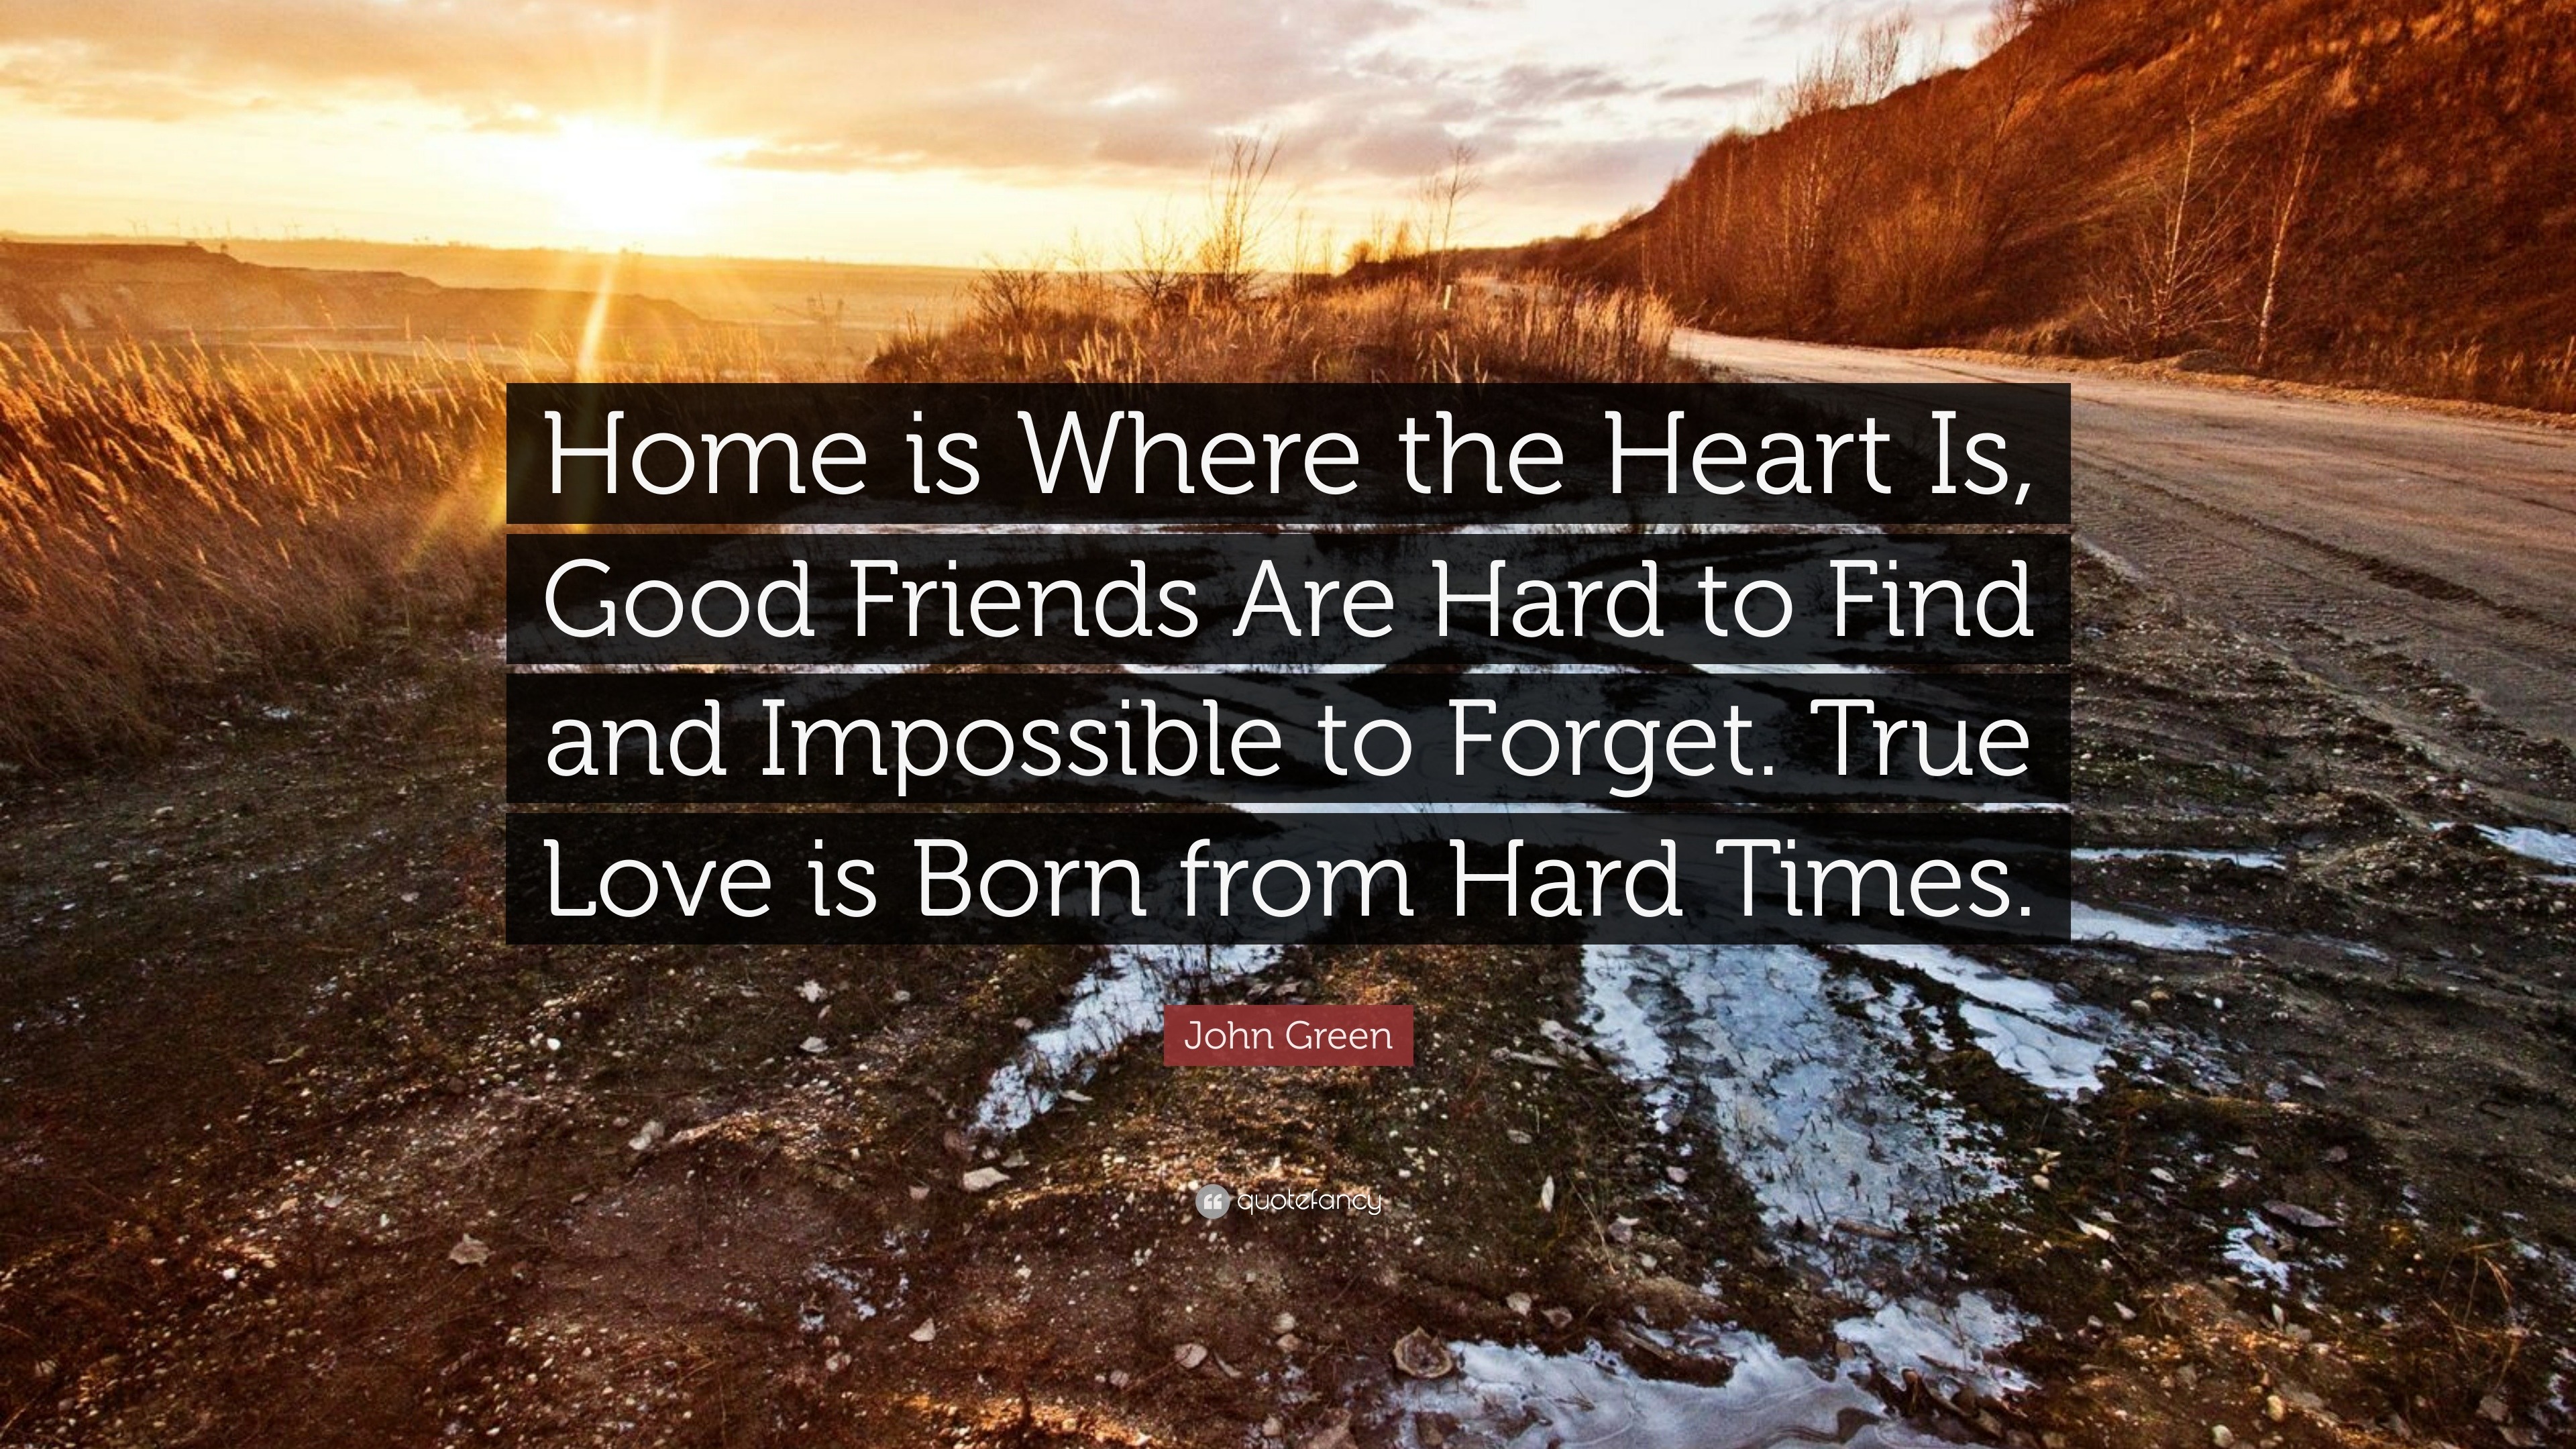 John Green Quote Home Is Where The Heart Is Good Friends Are Hard To Find And